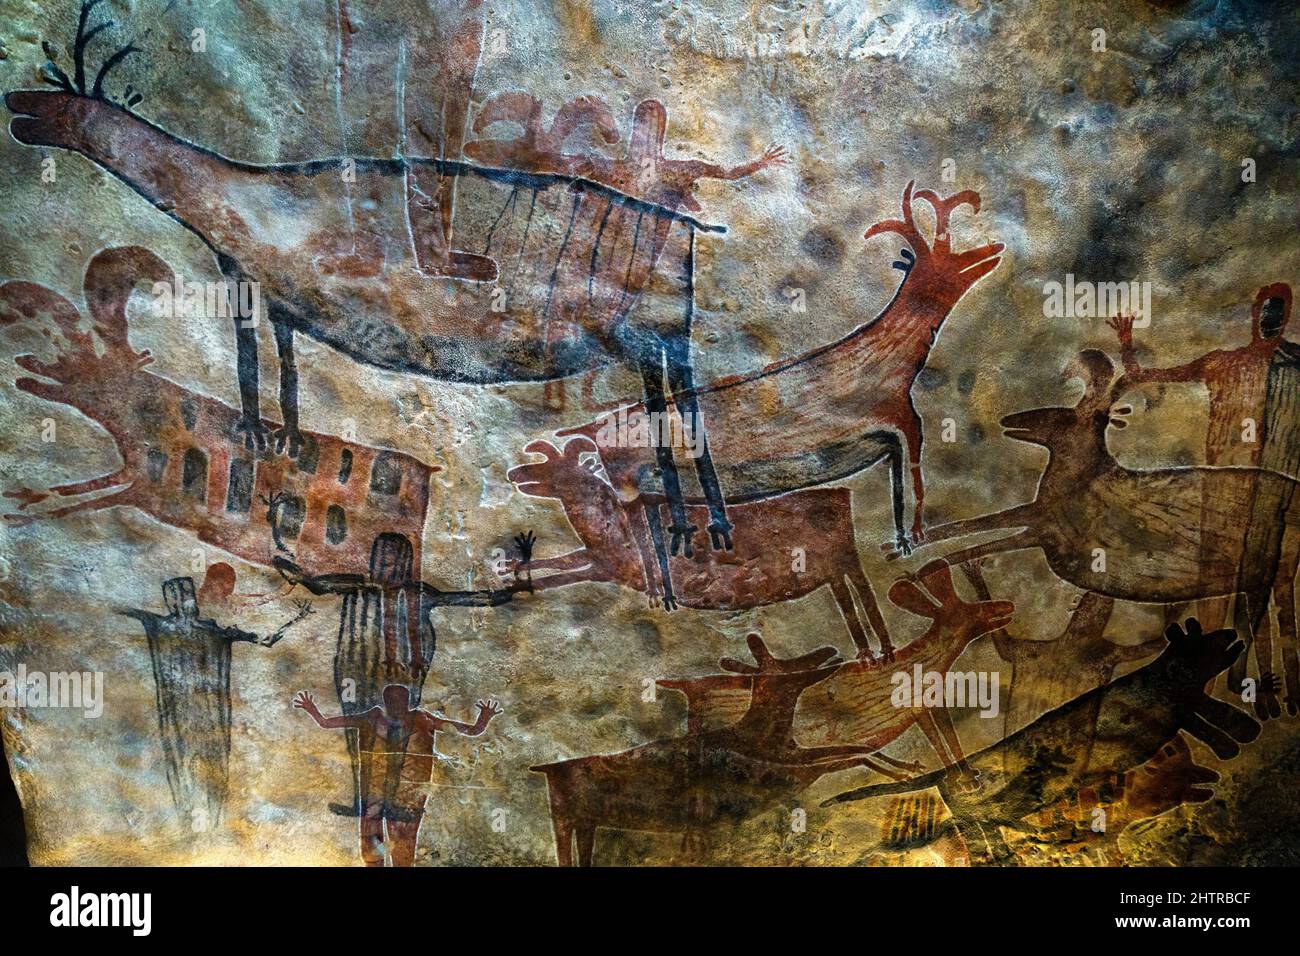 Cave art, Anthropology National Museum, Mexico City Stock Photo